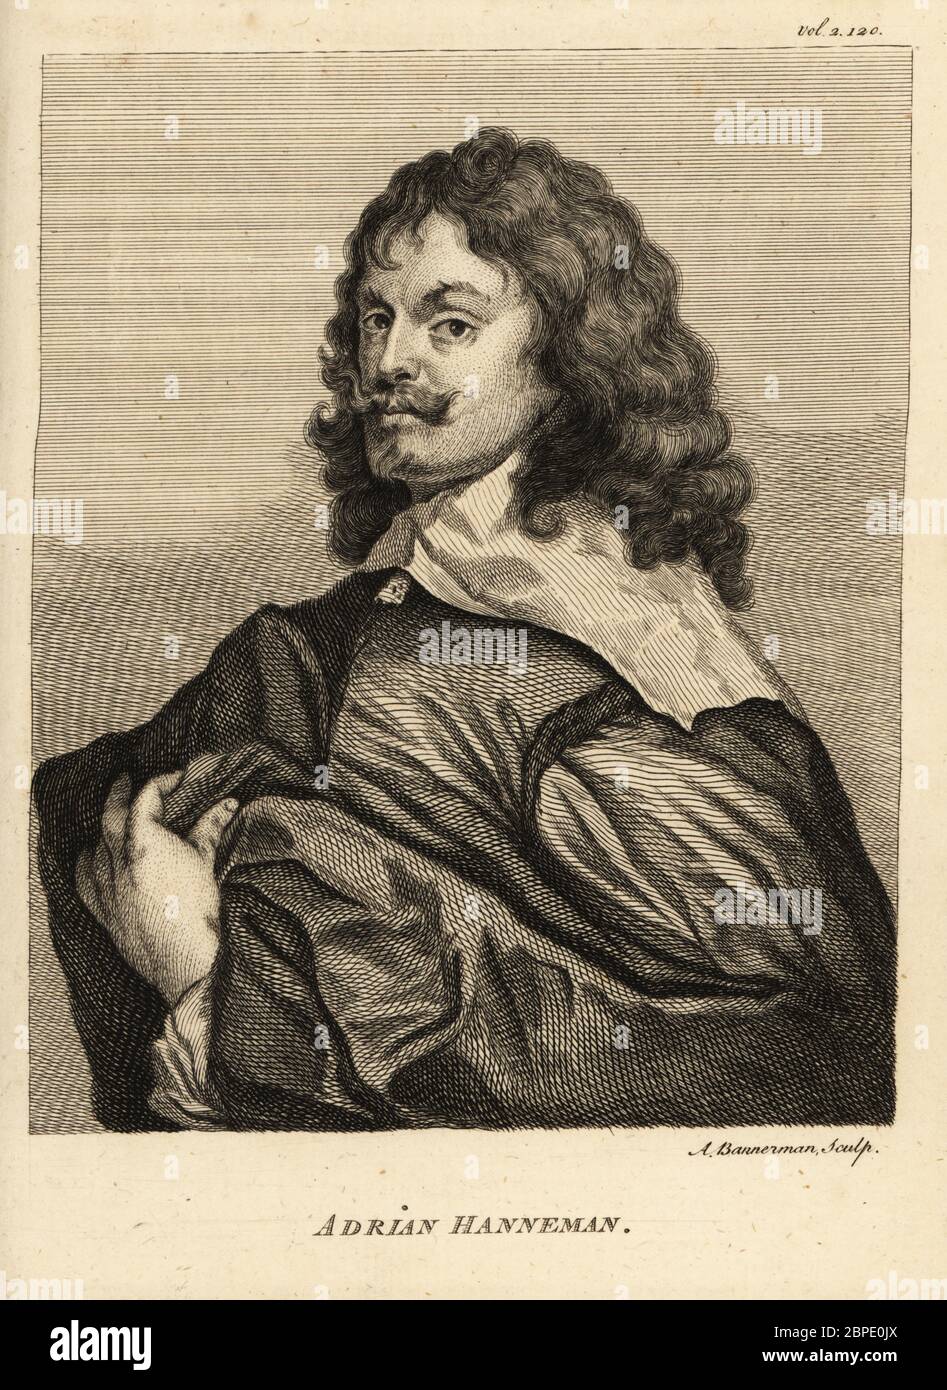 Portrait of Adriaen Hanneman, Dutch Golden Age painter best known for his portraits of the exiled British royal court, c.1603-1671. Adrian Hanneman. Copperplate engraving by Alexander Bannerman after a 1656 self-portrait by Hanneman from Horace Walpole’s Anecdotes of Painting in England, London, 1765. Stock Photo